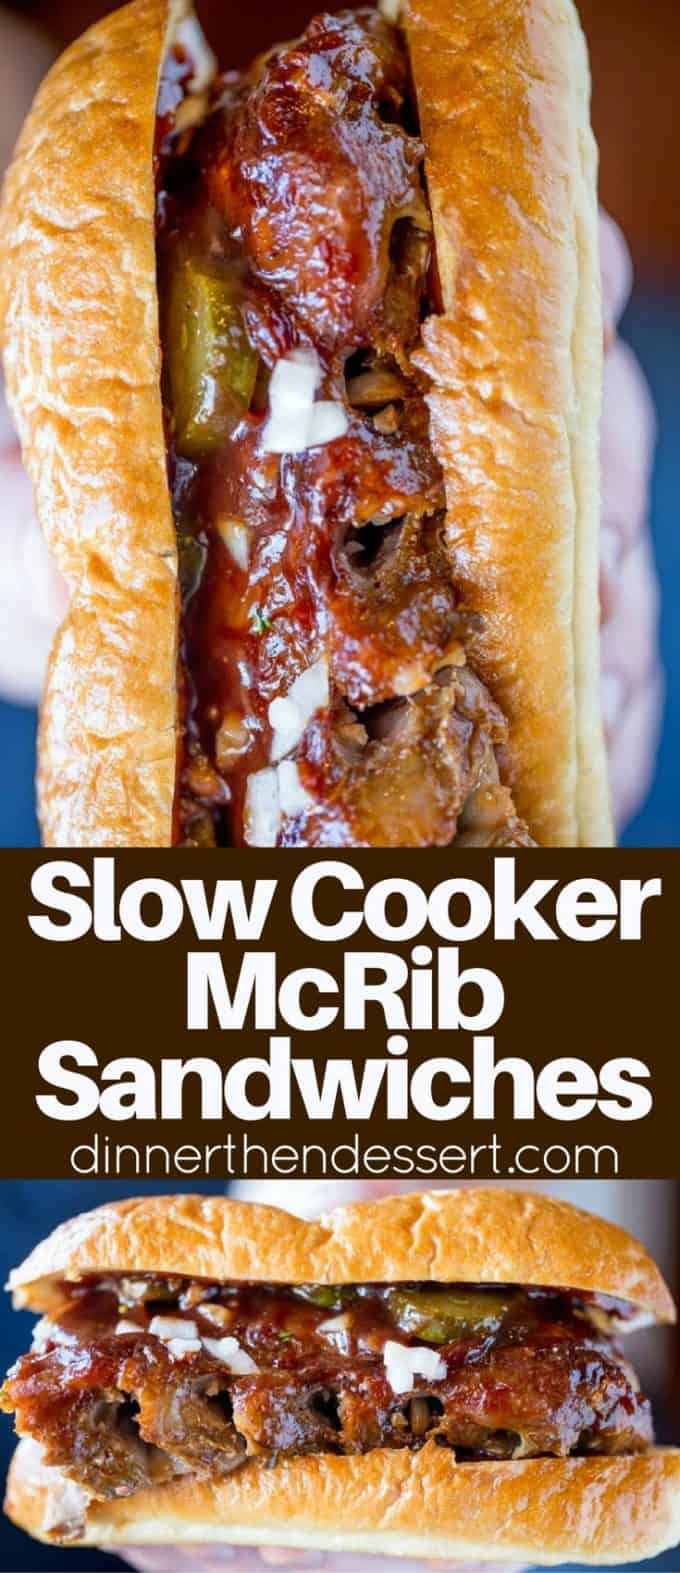 Slow Cooker McRib Sandwiches with an amazing baby back rib meat topped with the classic McDonald's bbq sauce, onions and pickles.